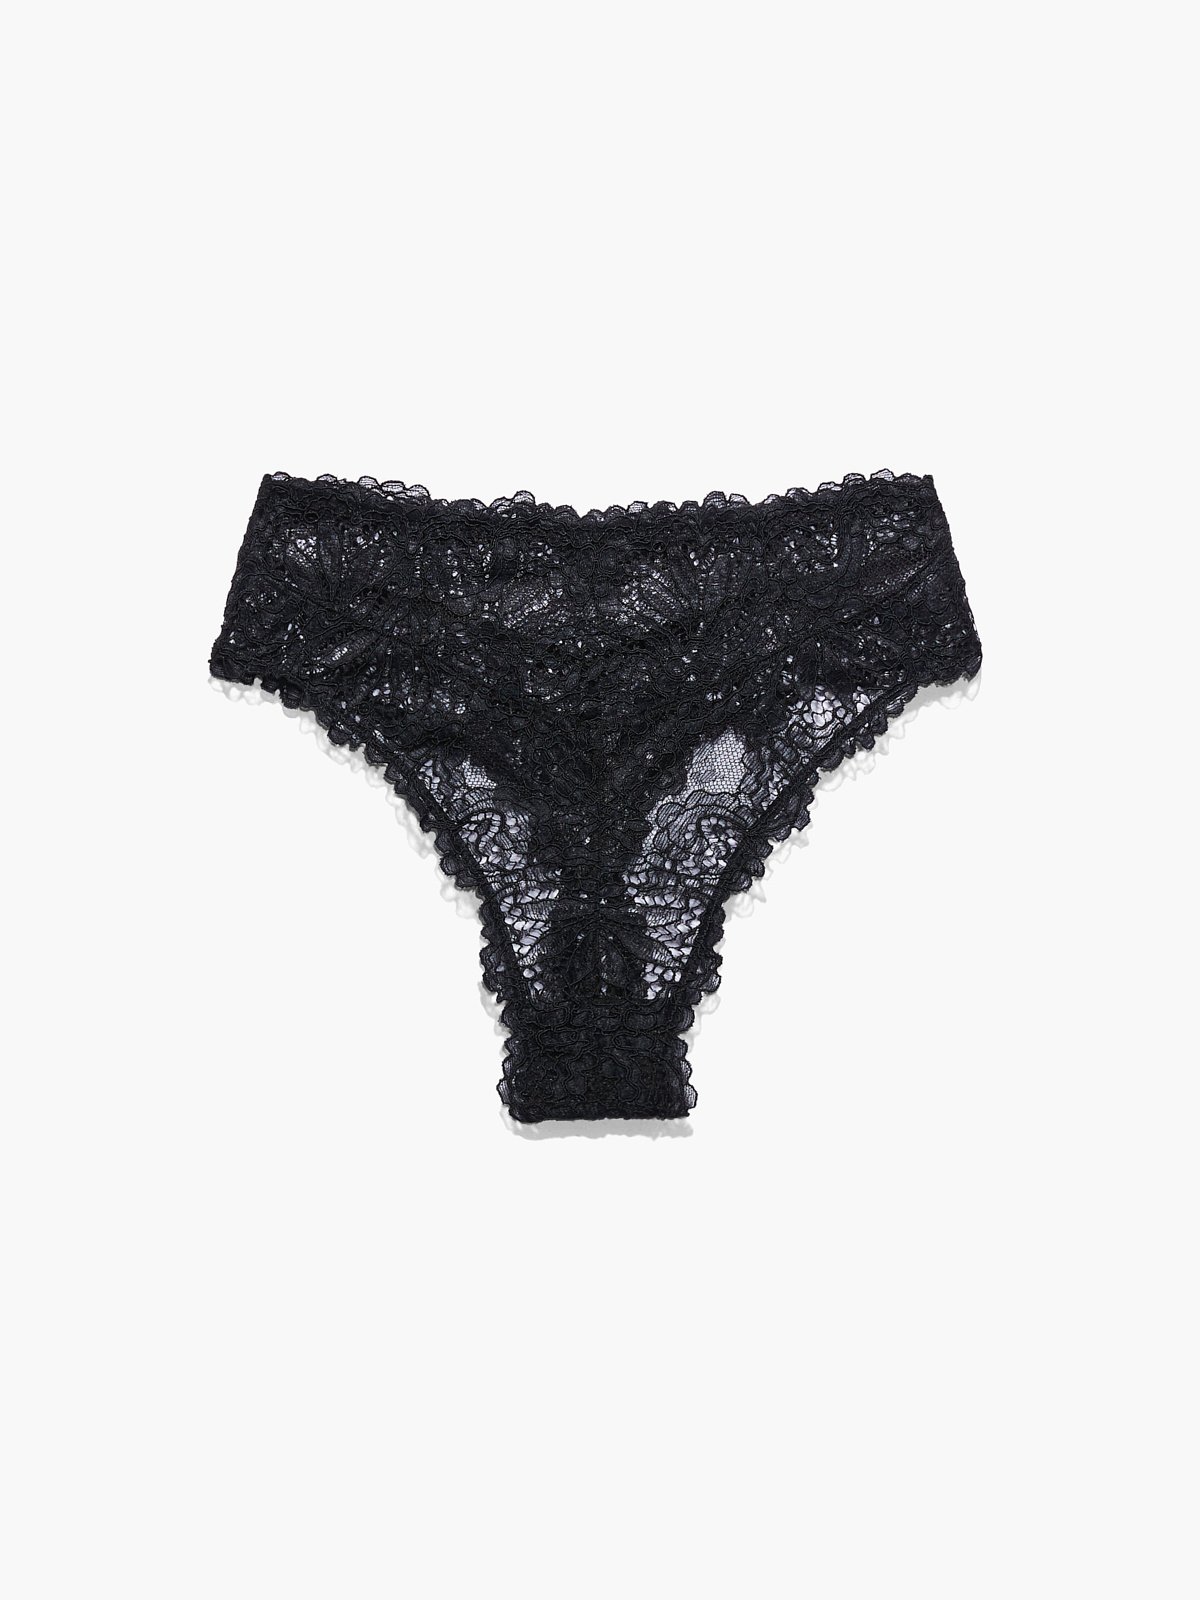 Romantic Corded Lace High-Waist Thong in Black | SAVAGE X FENTY